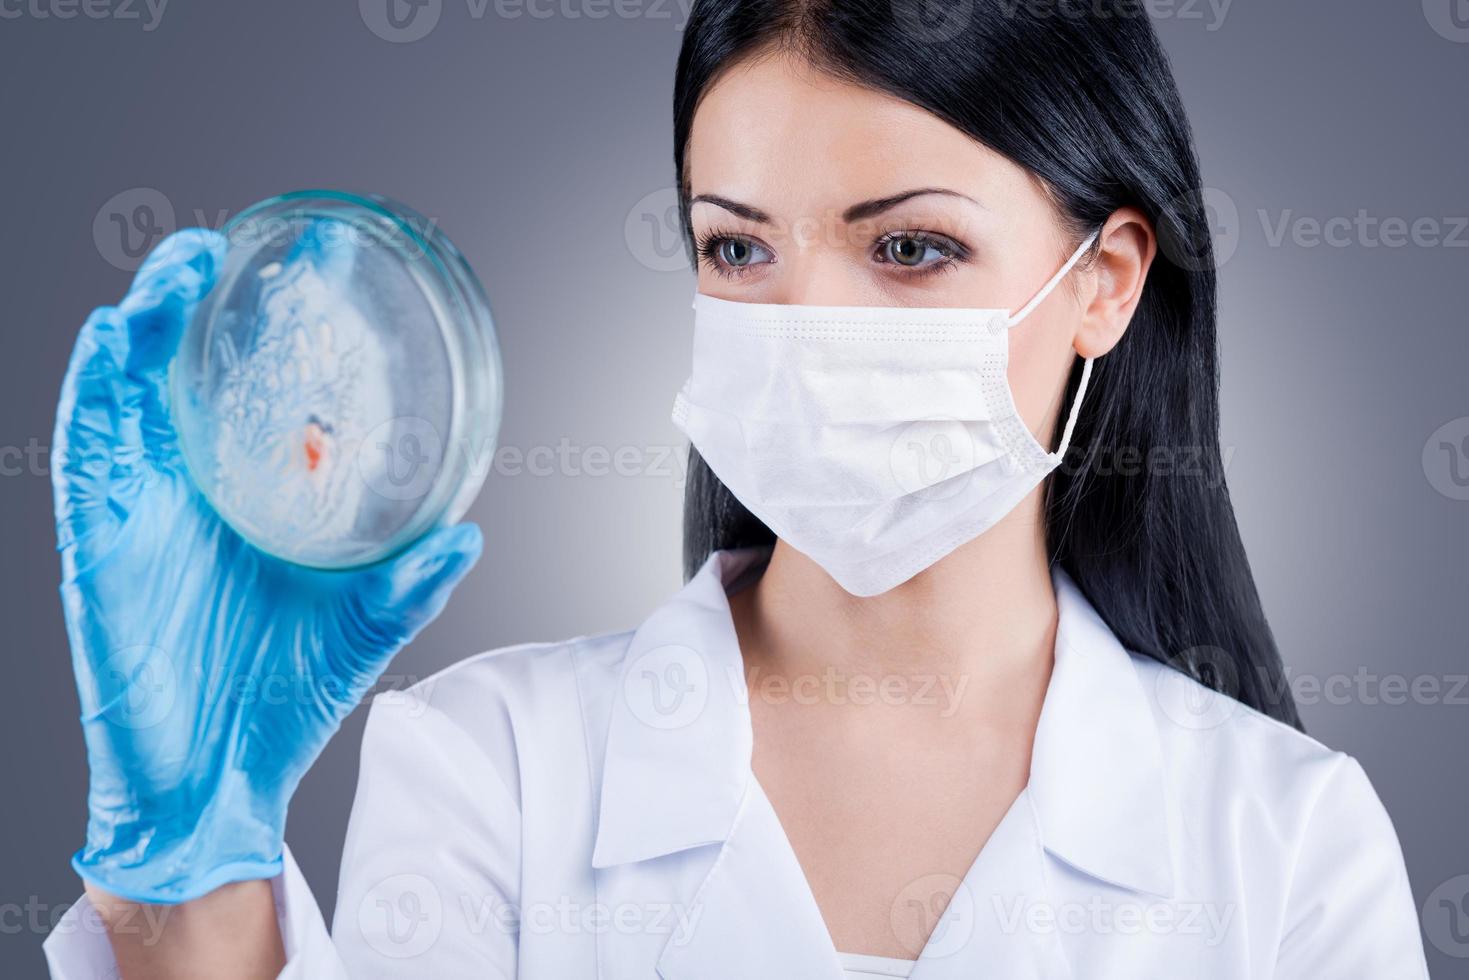 Making the analyze. Confident female doctor in white uniform holding Petri dish and looking at it while standing against grey background photo